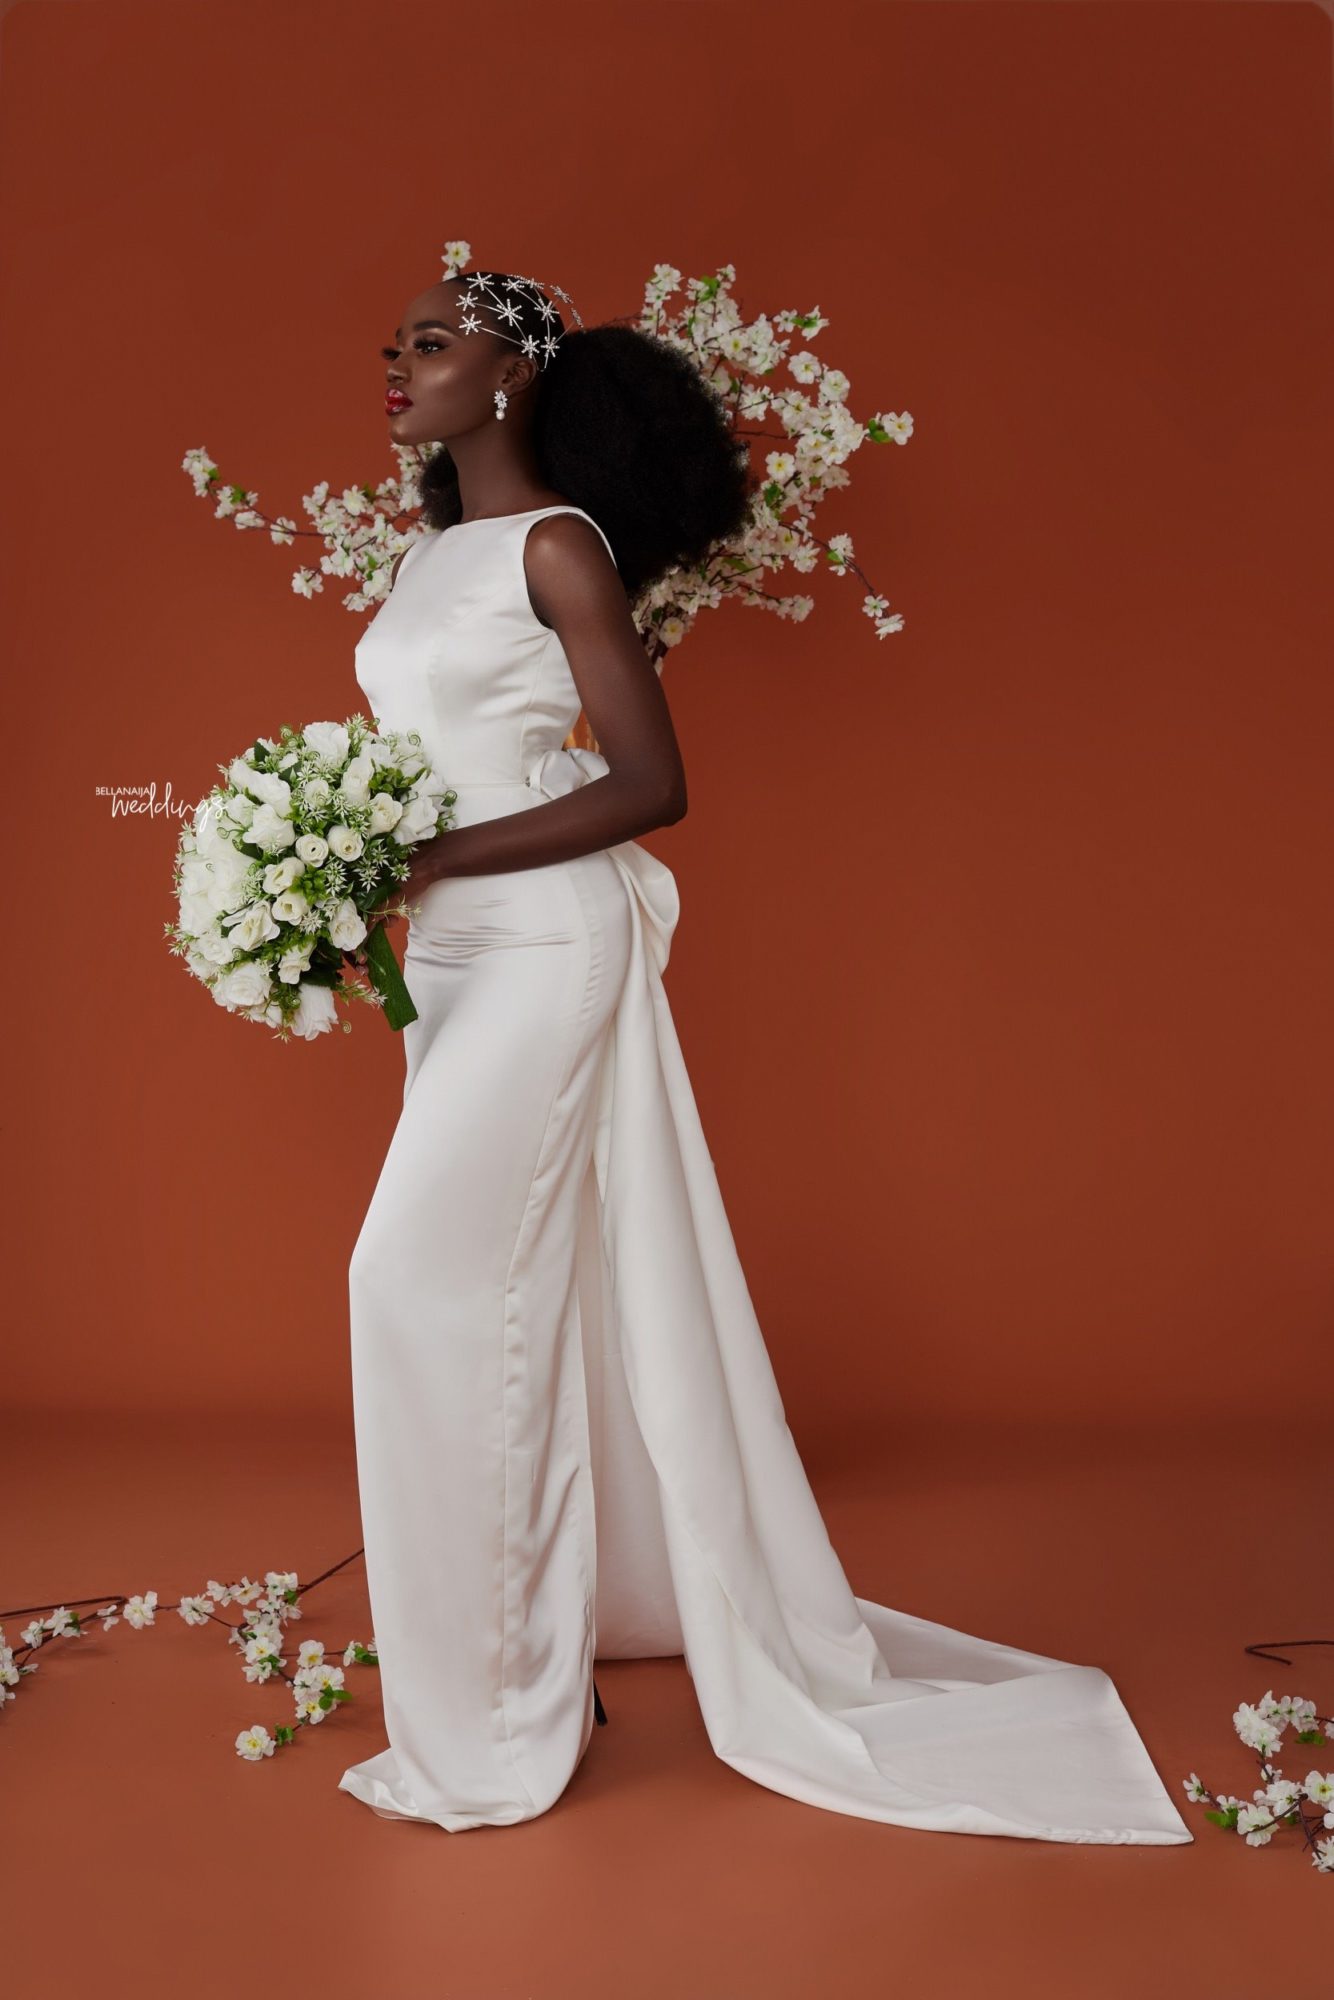 BN Bridal: Wana Sambo Releases her Debut Bridal Collection